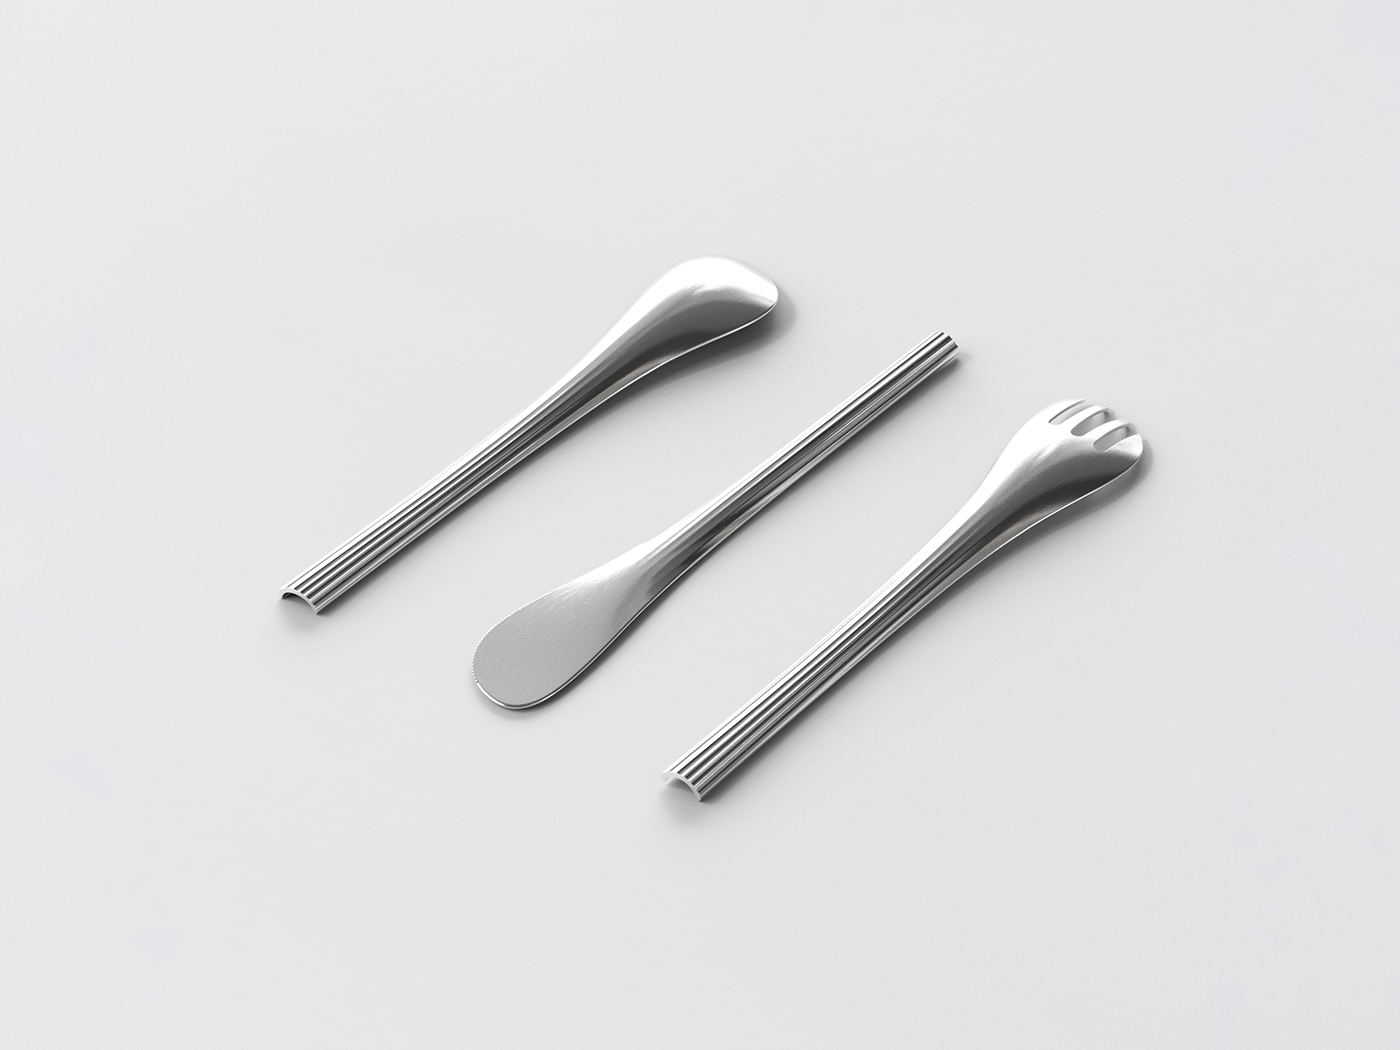 biomimicry craft craftsmanship cutlery cutlery design fork Knift product design  spoon tableware